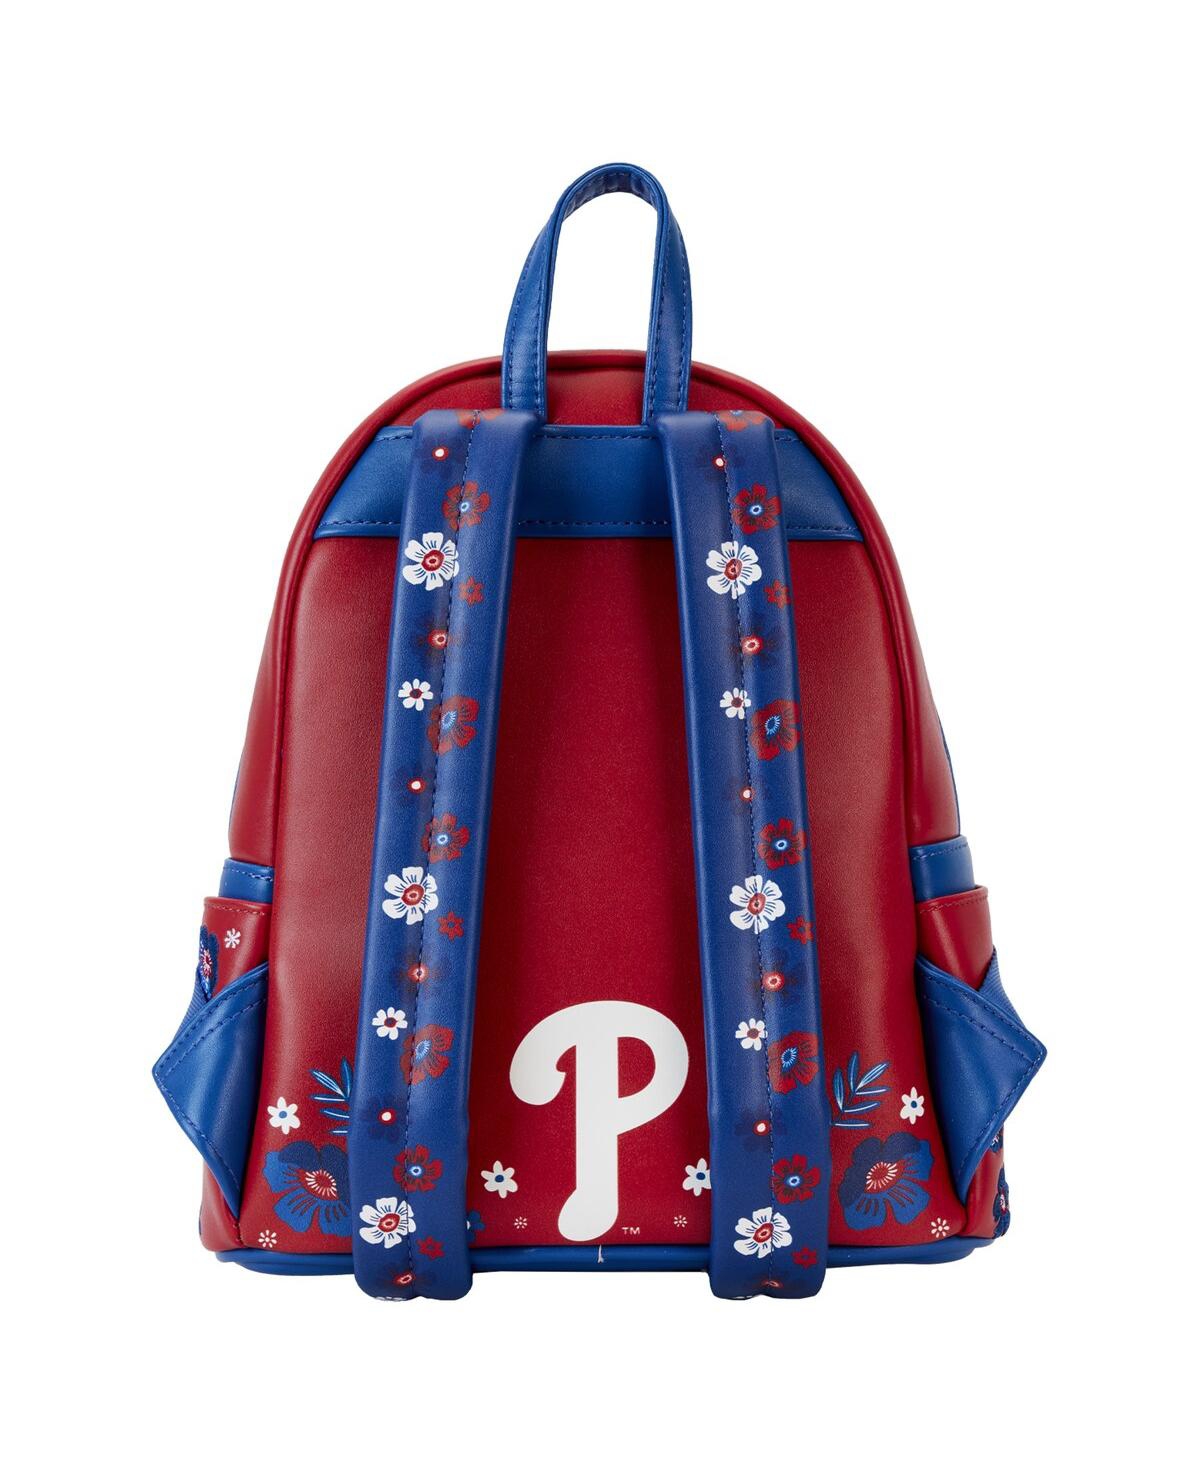 Shop Loungefly Philadelphia Phillies Floral Mini Backpack In No Color